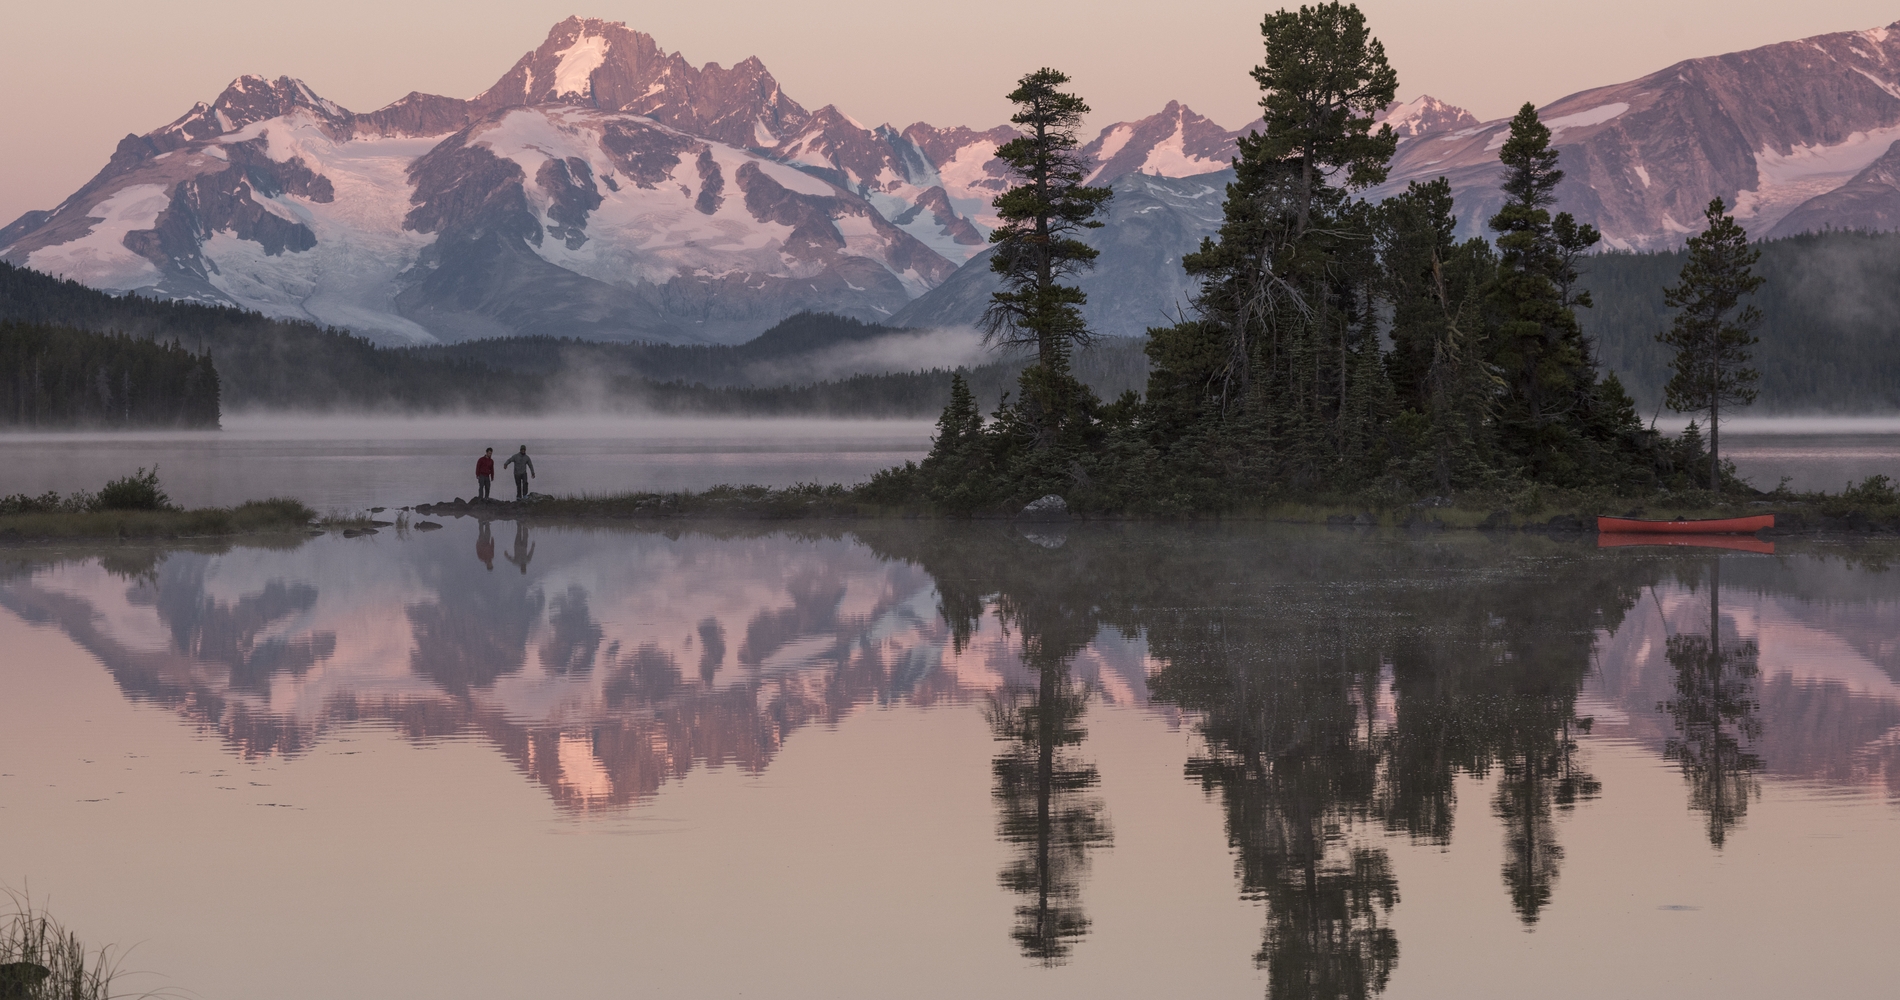 Two people walk along an island outcrop in a lake. The sun is setting on the mountains in the background. There is a stand of evergreen trees on the island and the image of the trees and mountains are reflected in the lake.